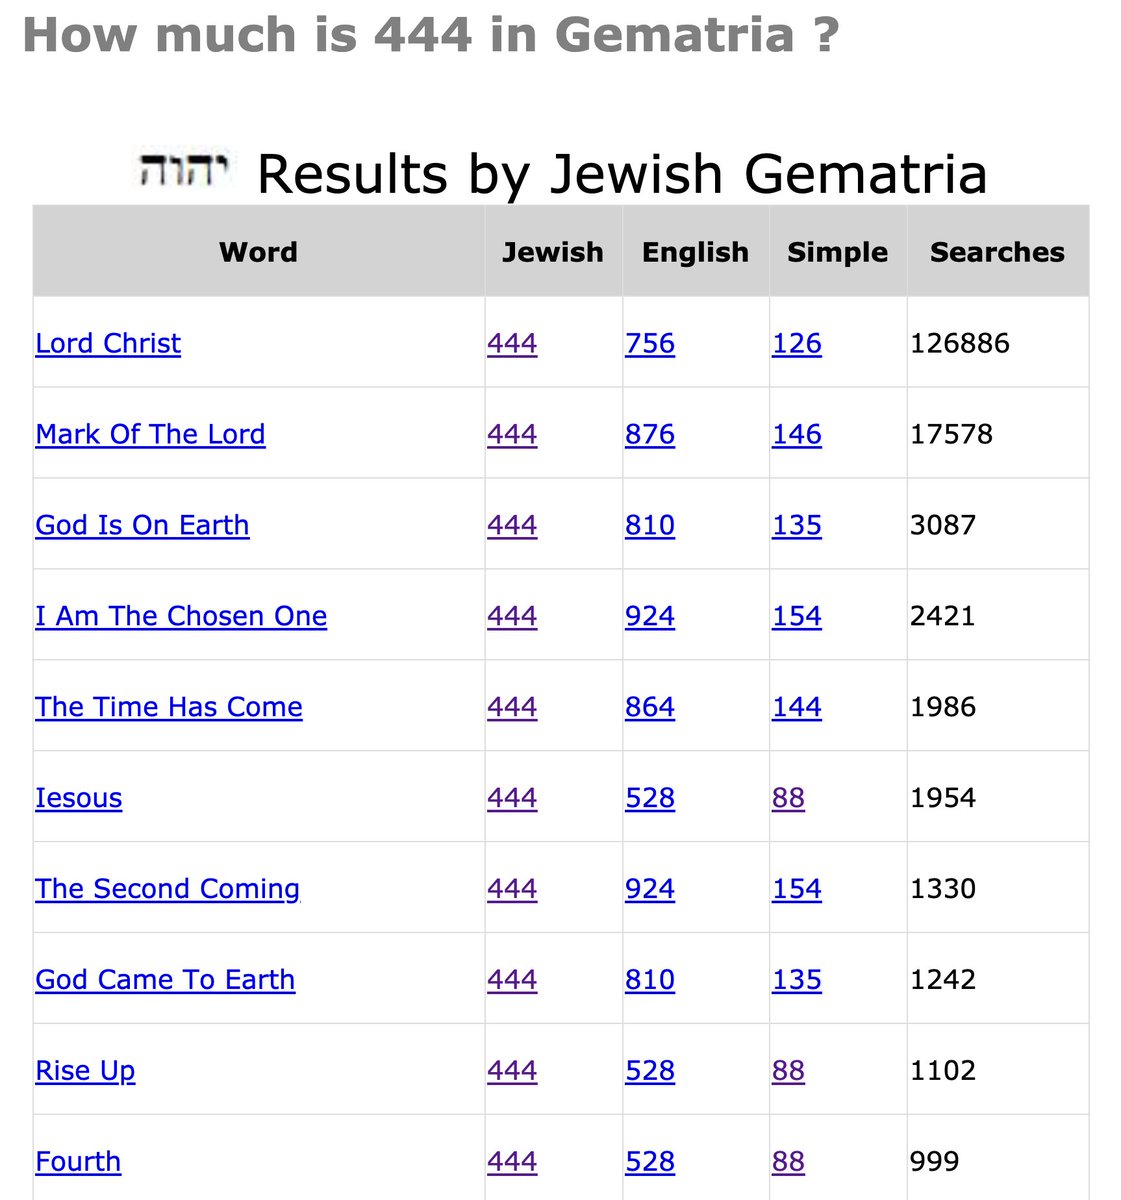 6/xA recent Gematria result was something like "Multiply Five Times Eleven".This is getting weird, man.All glory goes to God.Fireworks soon.God bless.PS: from their running time of 4:44, https://www.gematrix.org/?word=444 